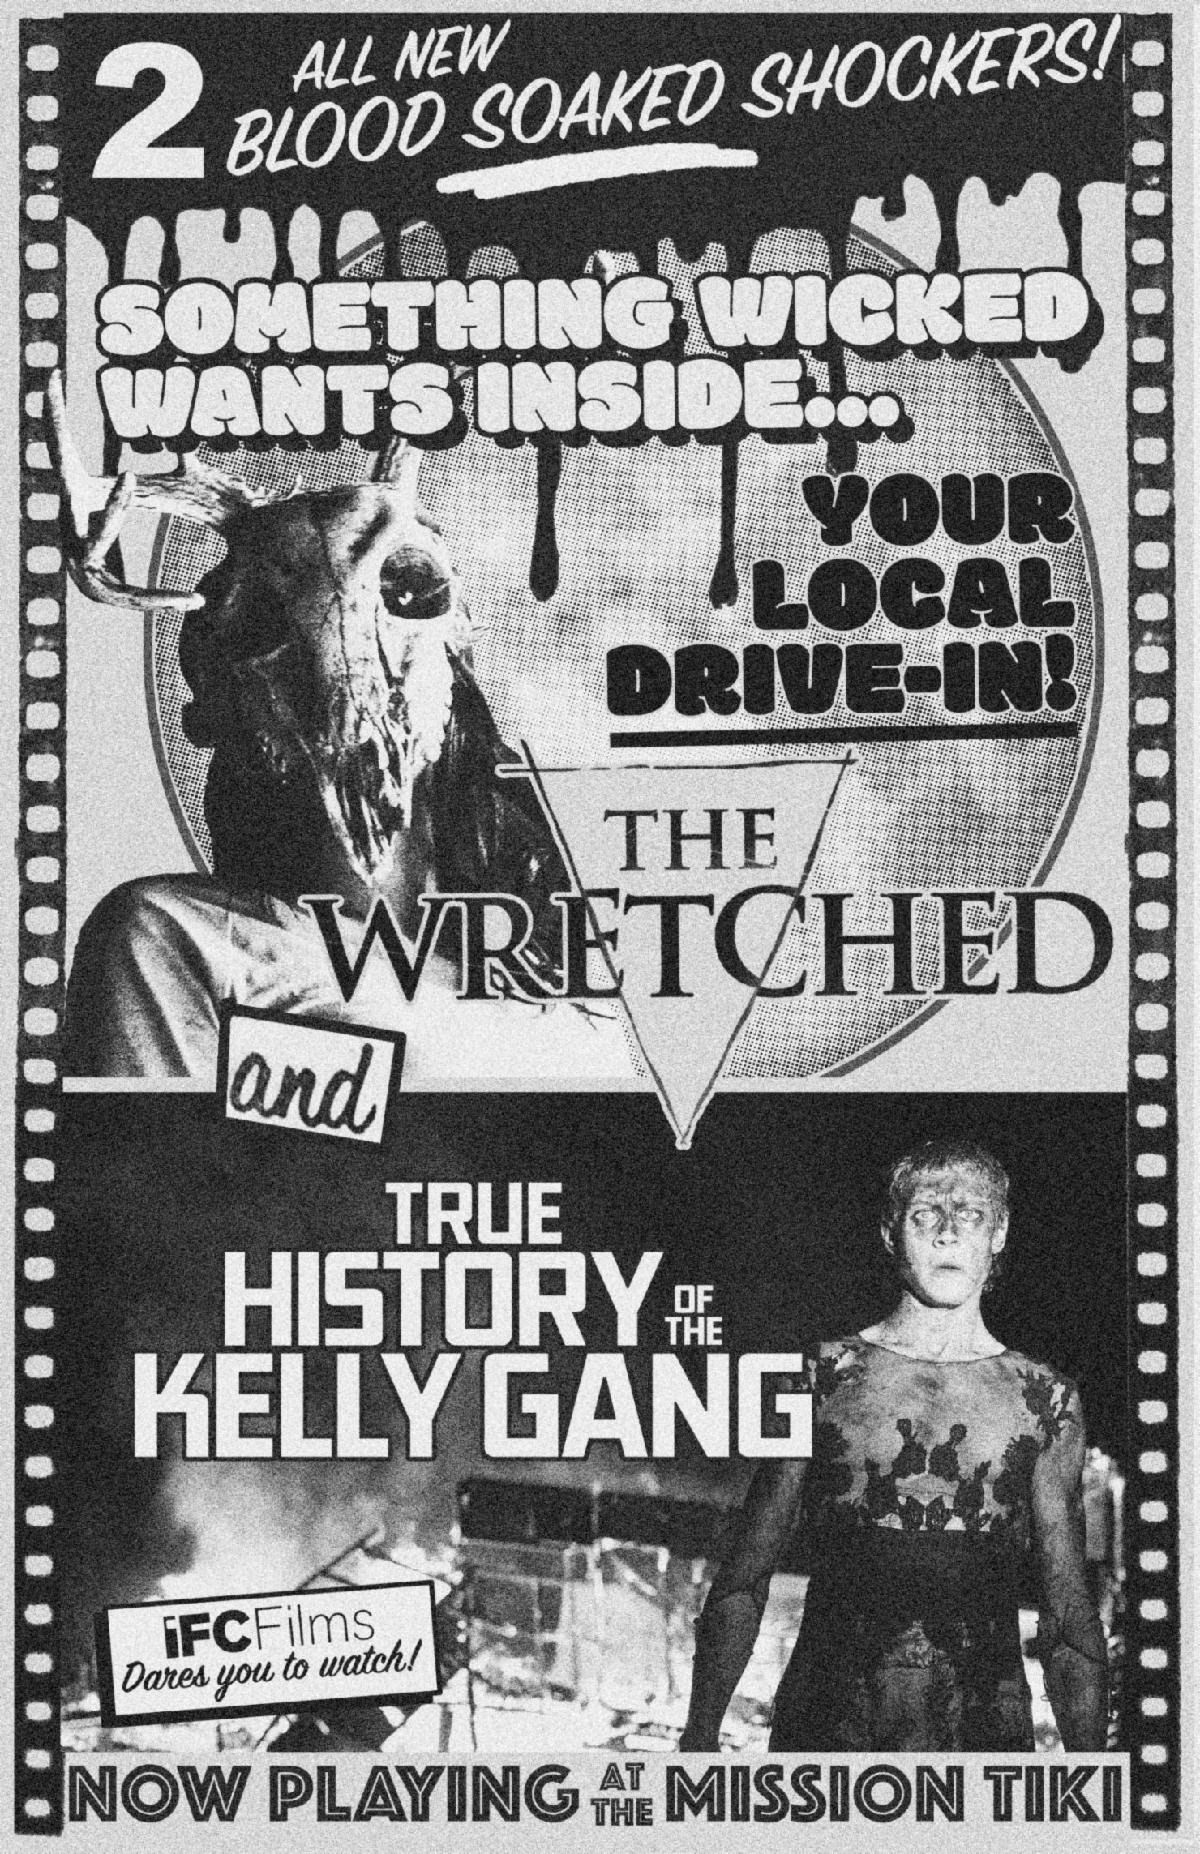 The Wretched Drive-In Movie Poster